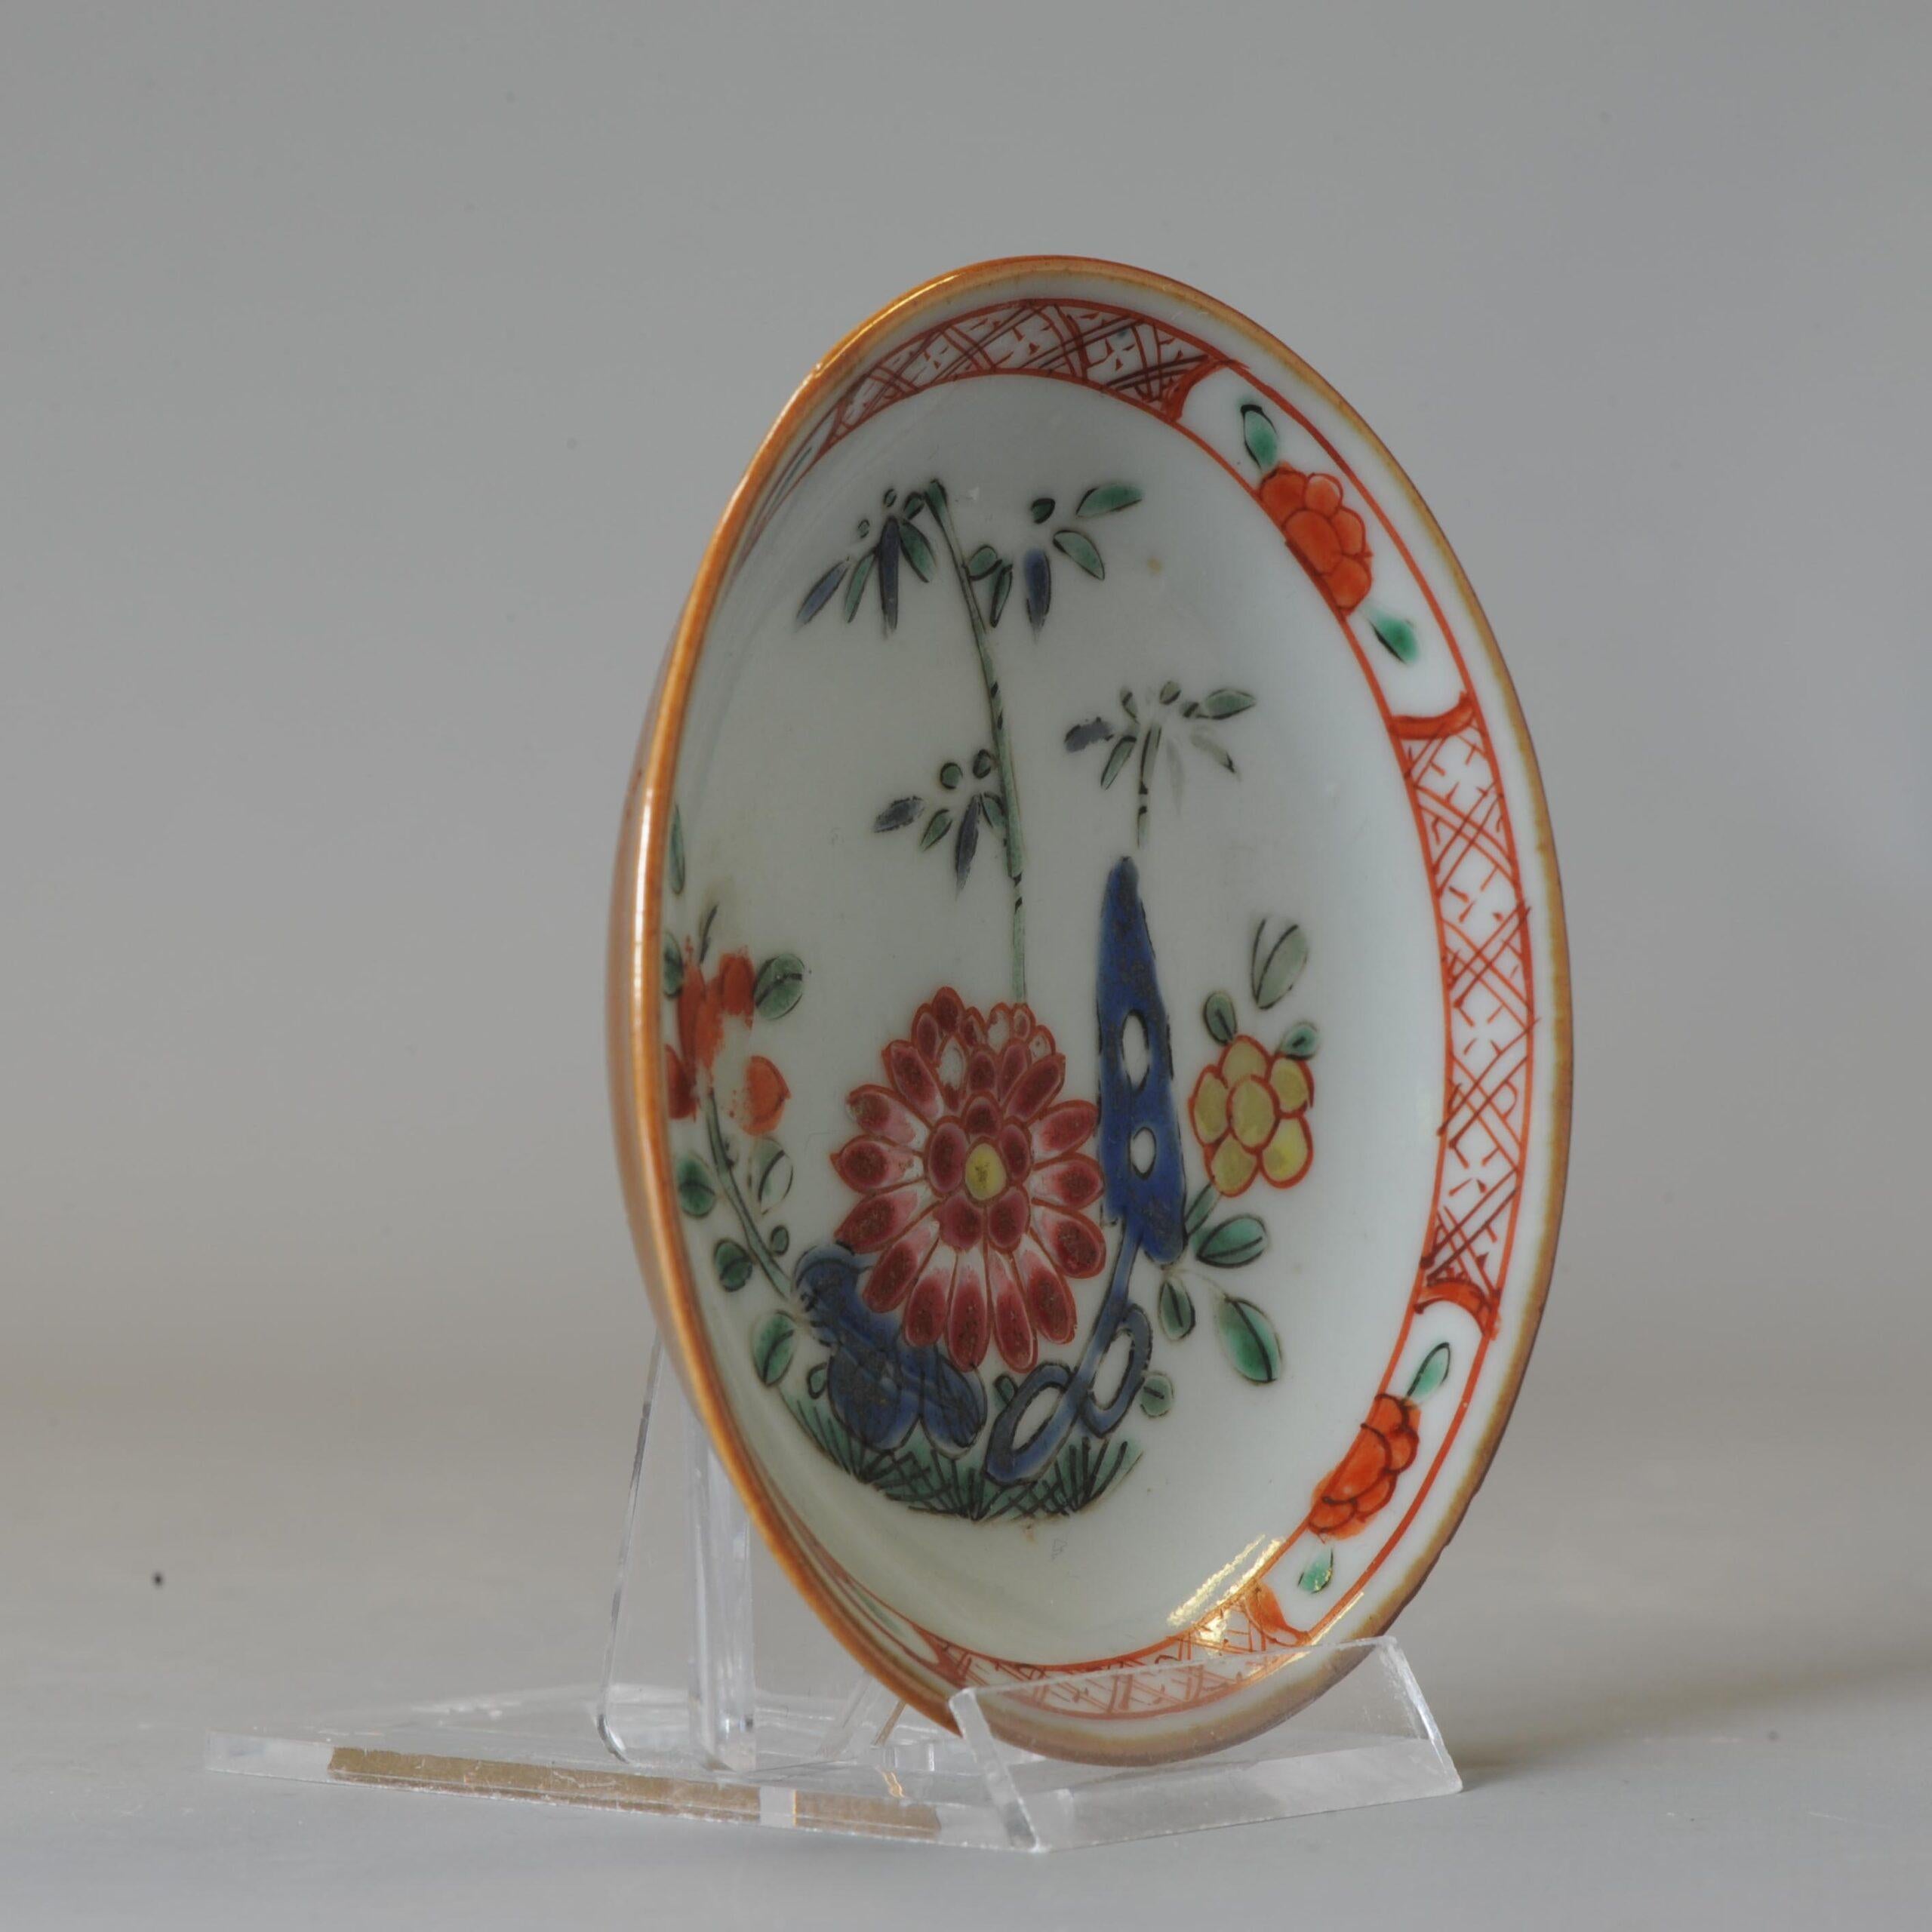 Very nicely decorated piece in Famille rose Palette. lovely Plate.

Additional information:
Material: Porcelain & Pottery
Type: Plates
Region of Origin: China
Period: 18th century Qing (1661 - 1912)
Age: Pre-1800
